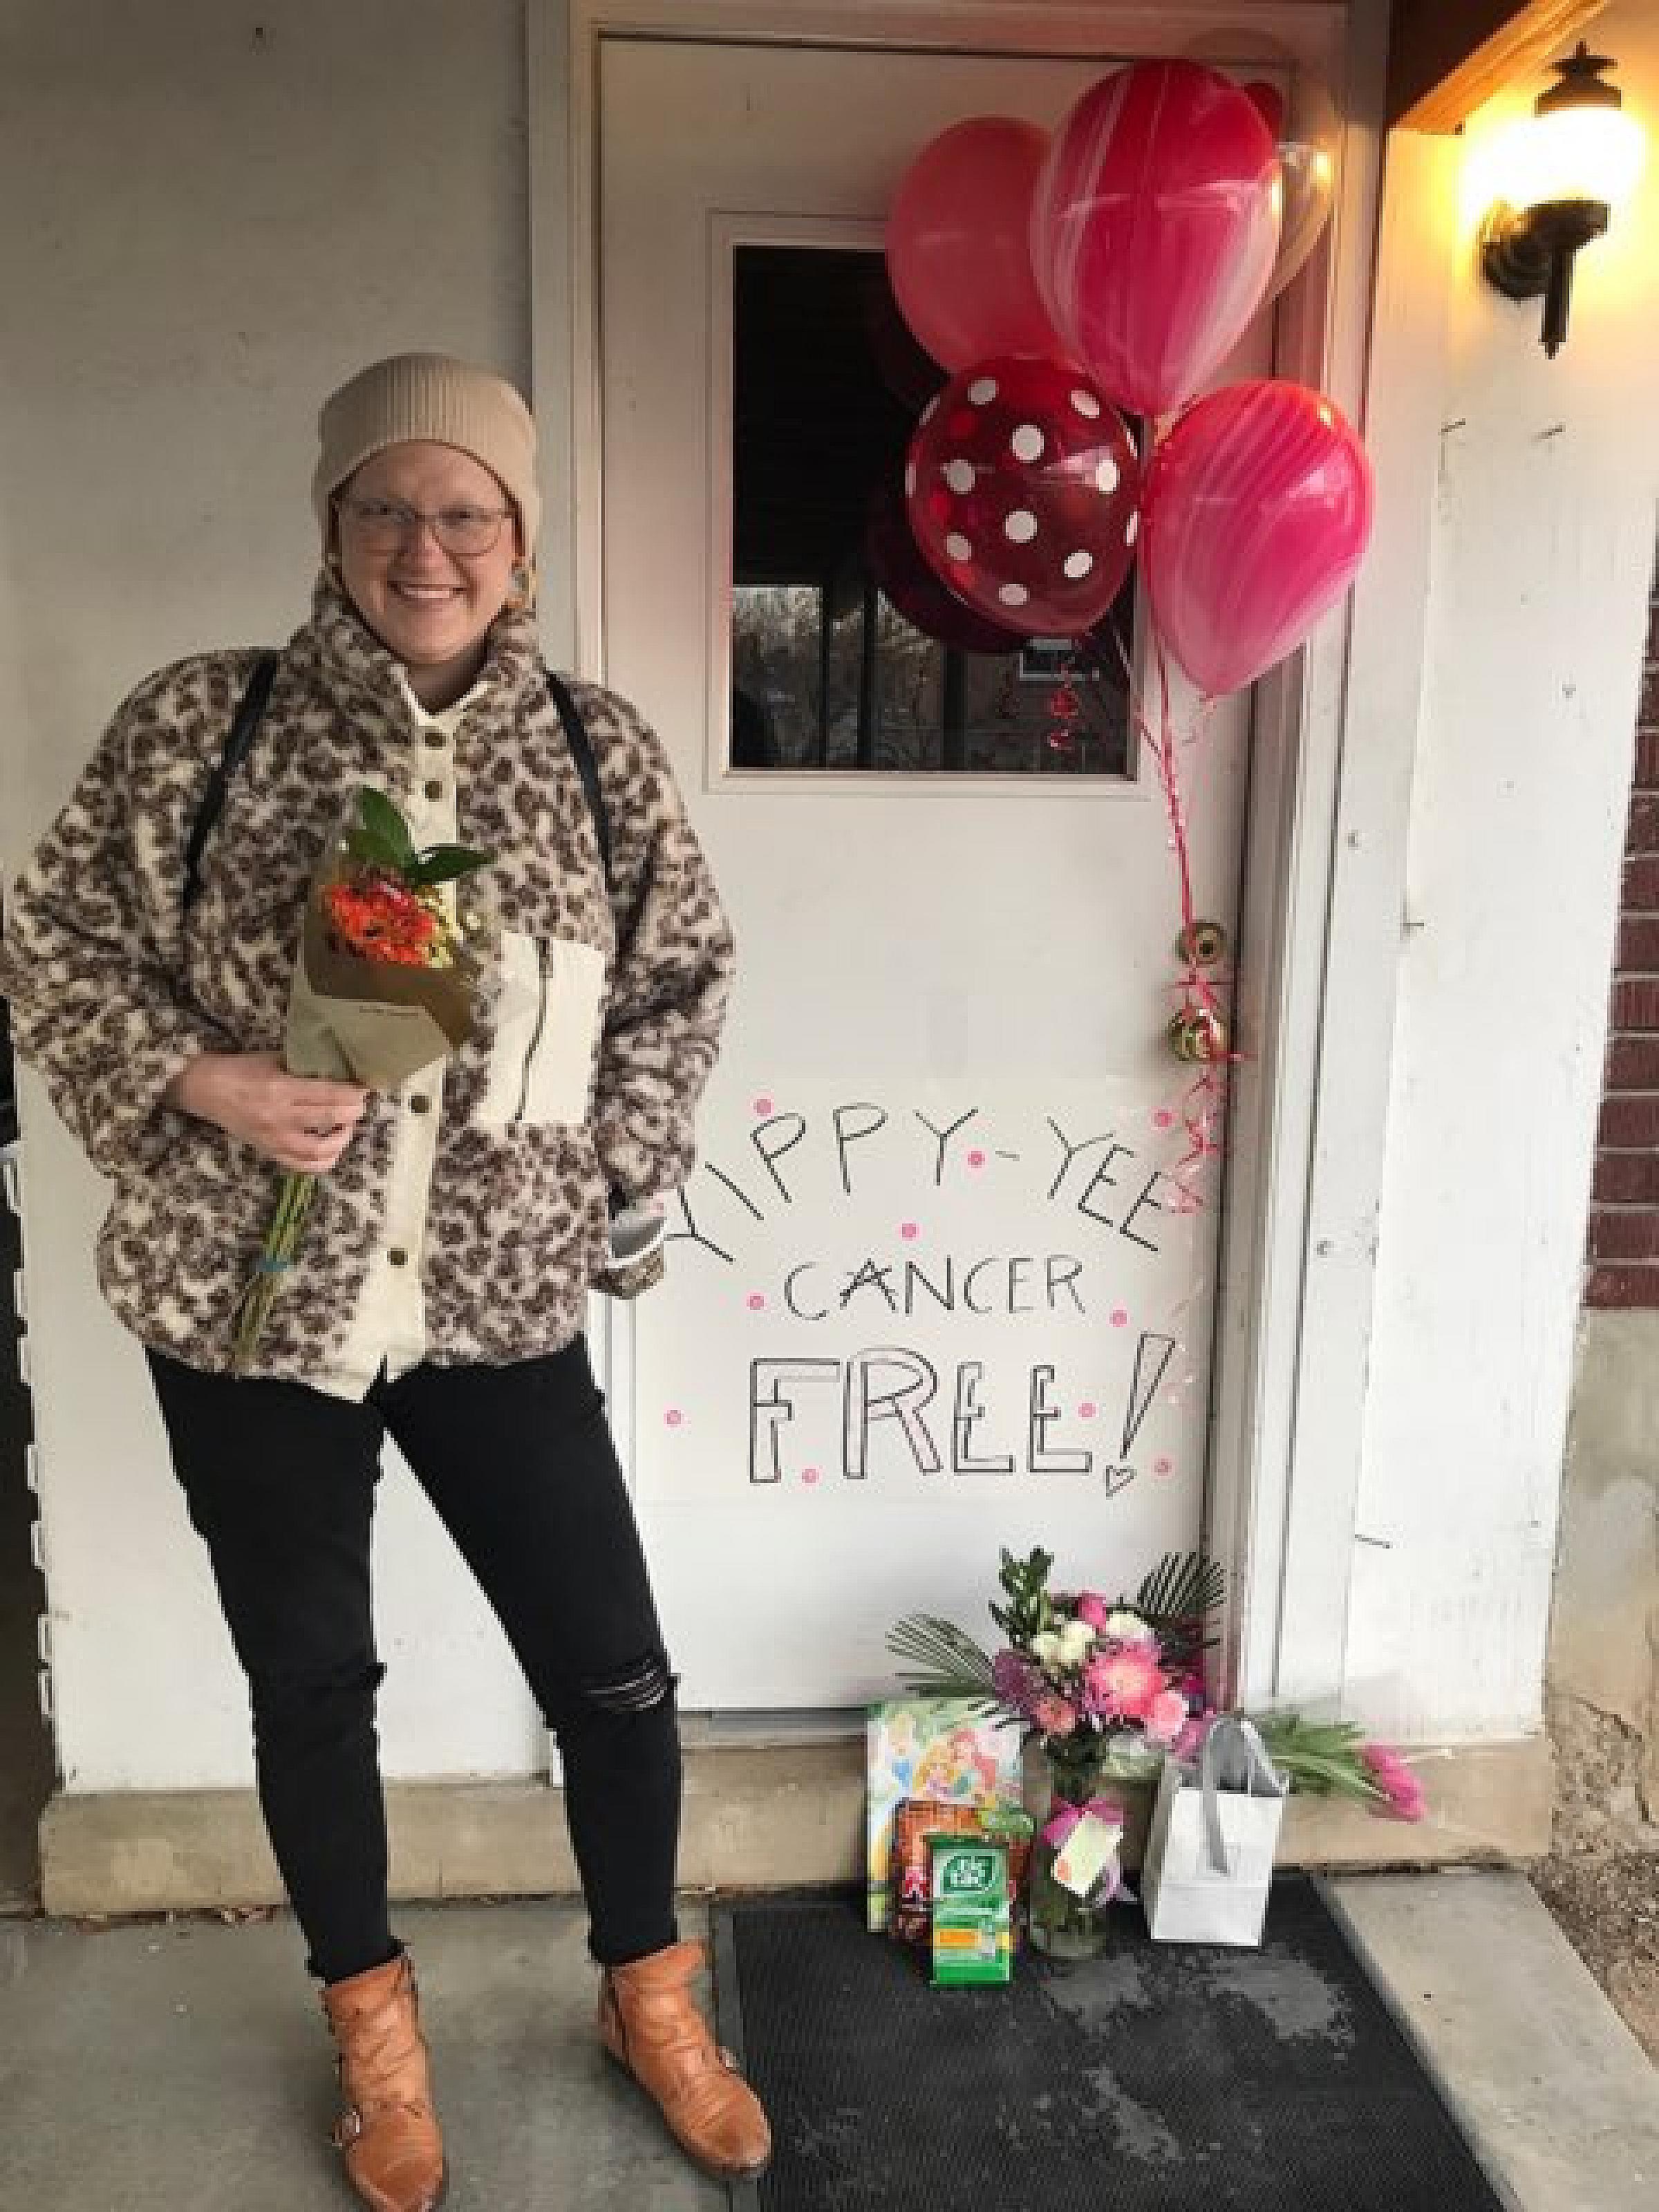 Laura Glissmeyer in front of presents, balloons, and a sign that says Yippy-Yee Cancer Free!